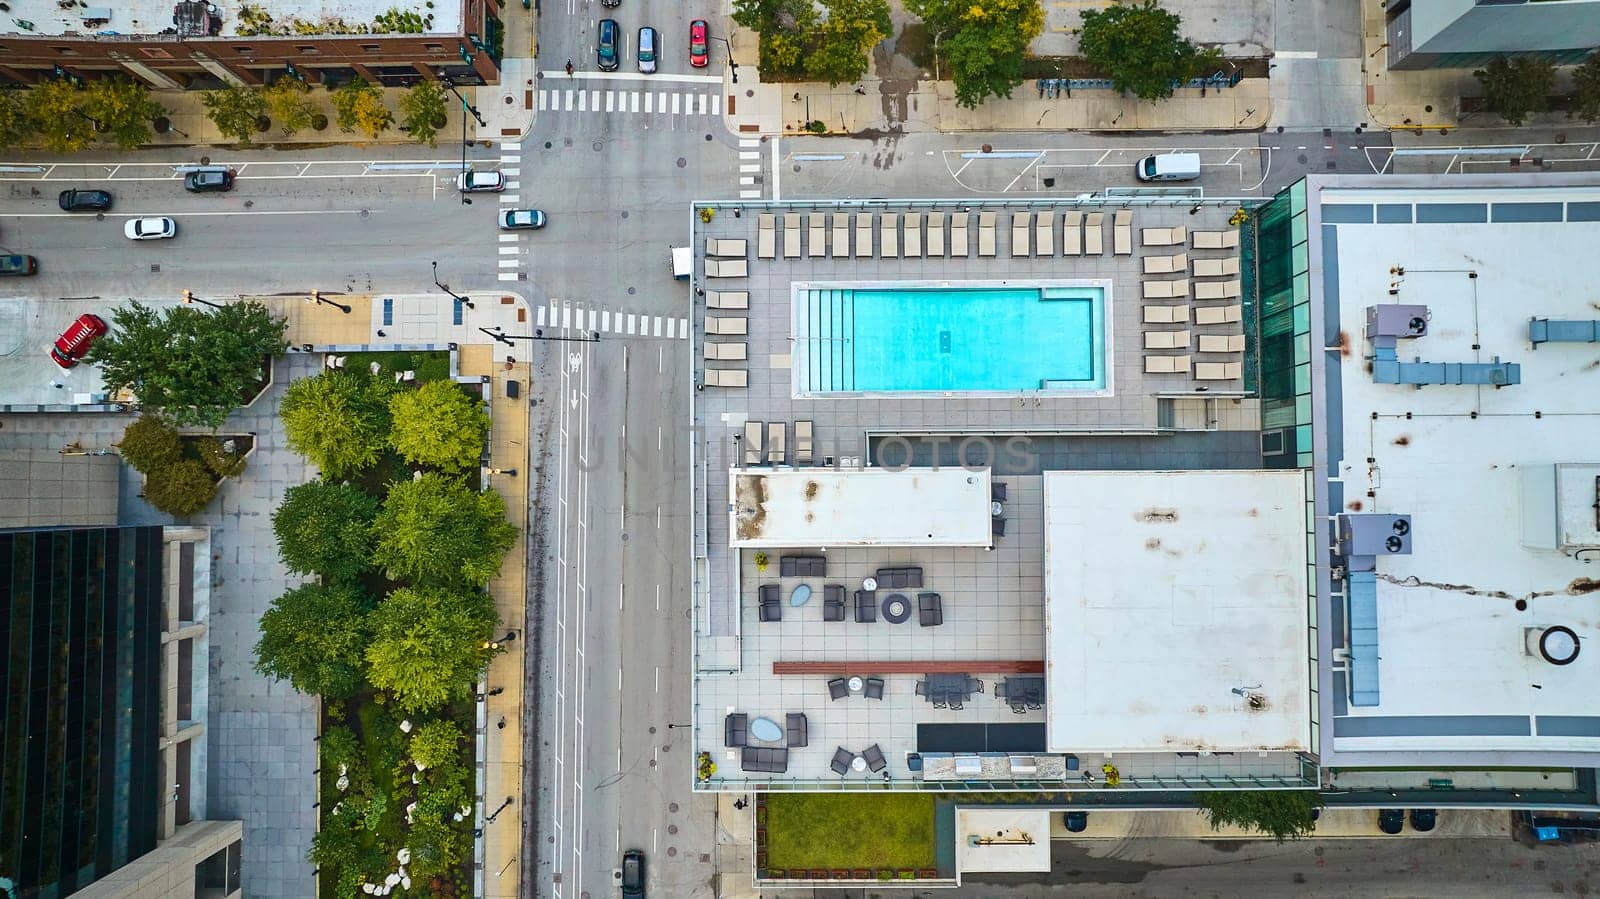 Rooftop pool aerial of Chicago on summer day in city with buildings from above, tourism by njproductions